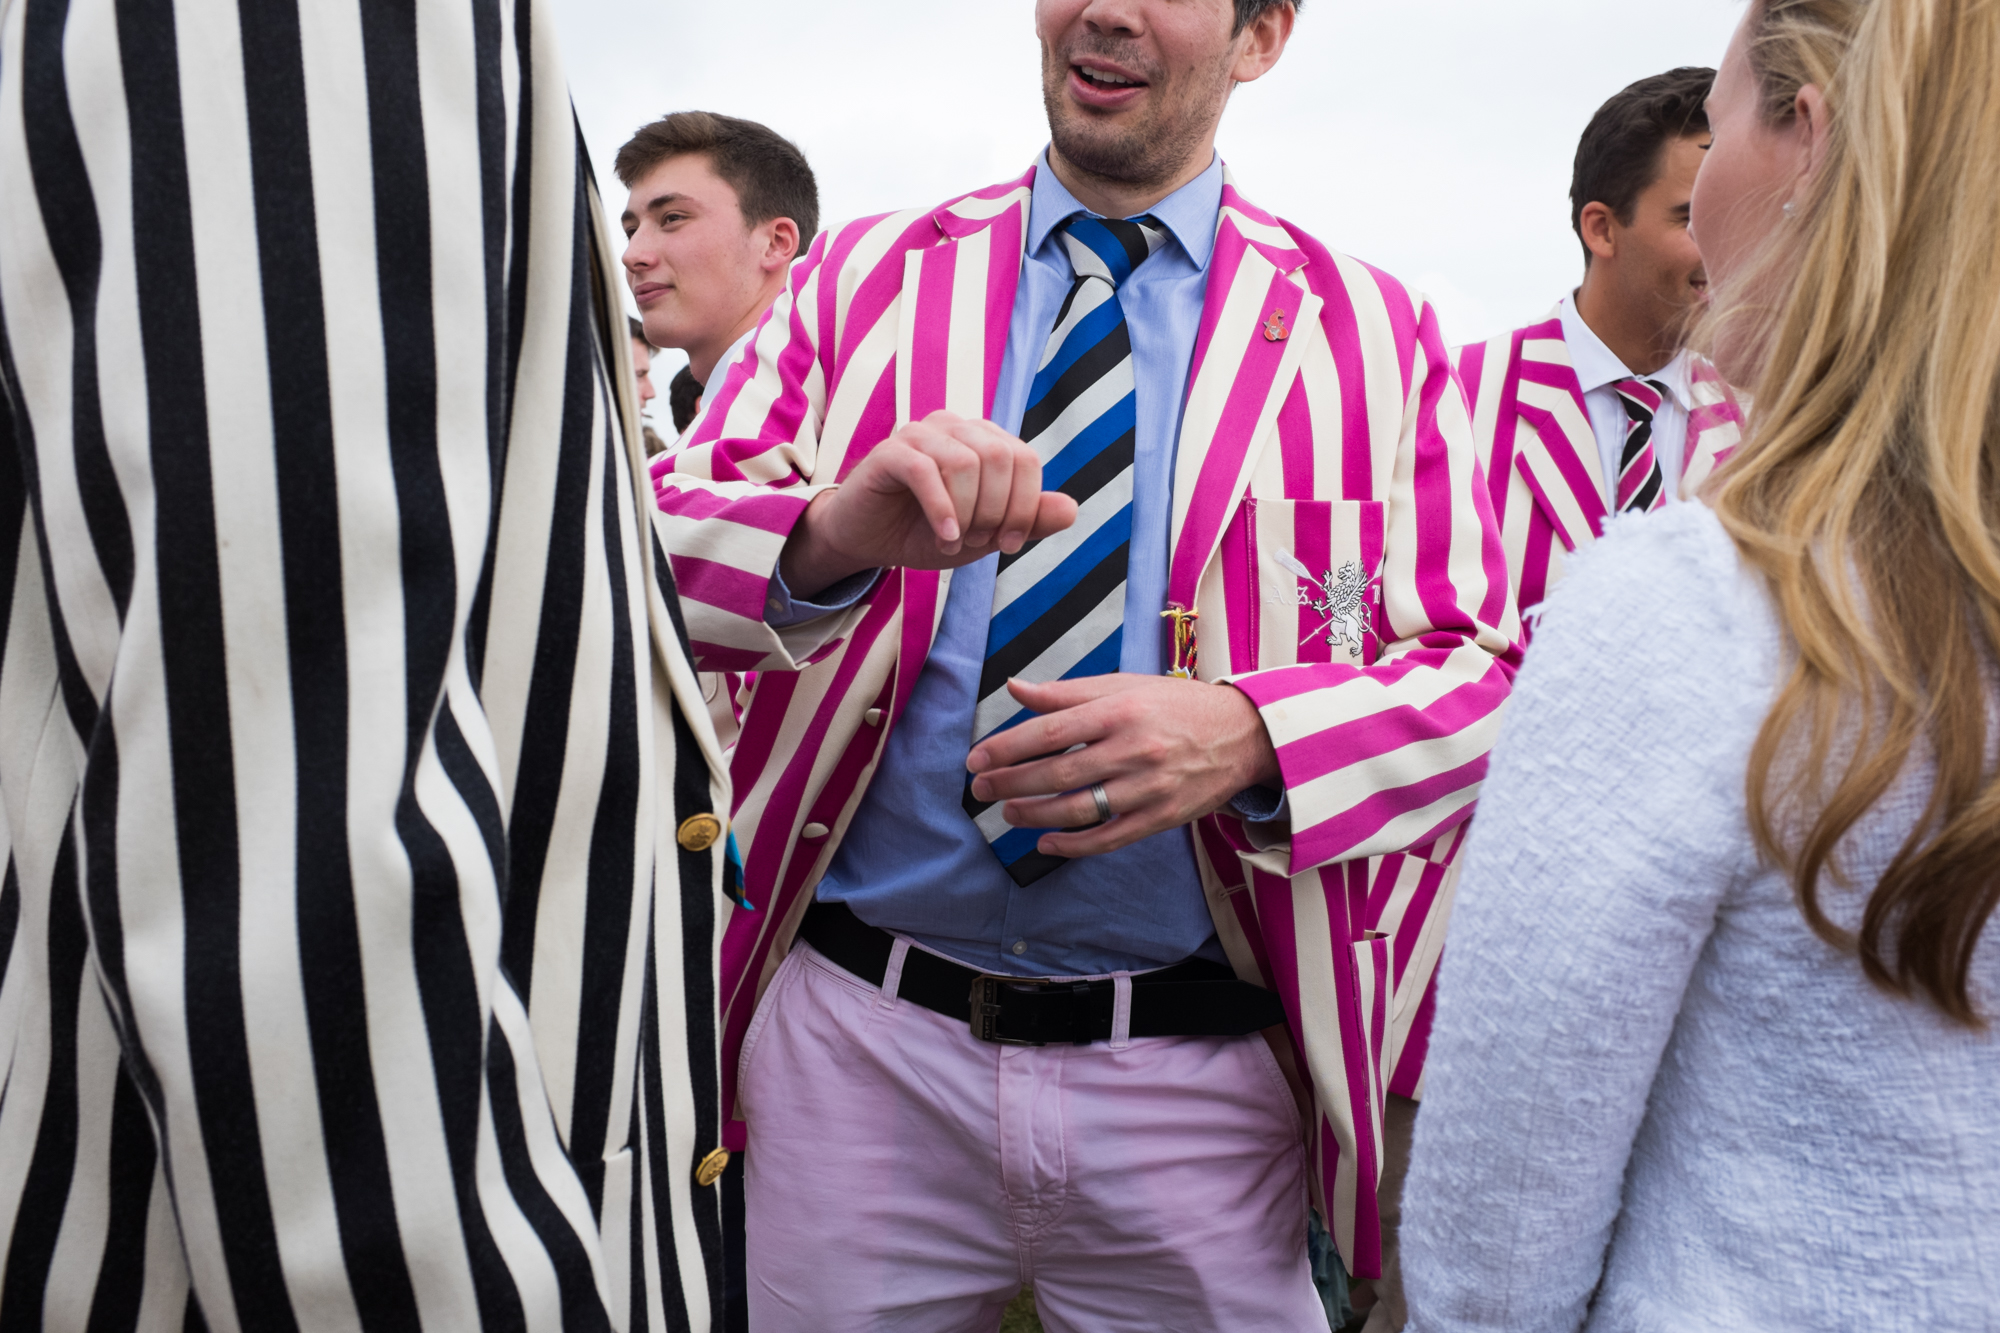  Rowers from Abingdon School, wearing their distinctive blazers, mingle with the crowds  at Henley Royal Regatta. 